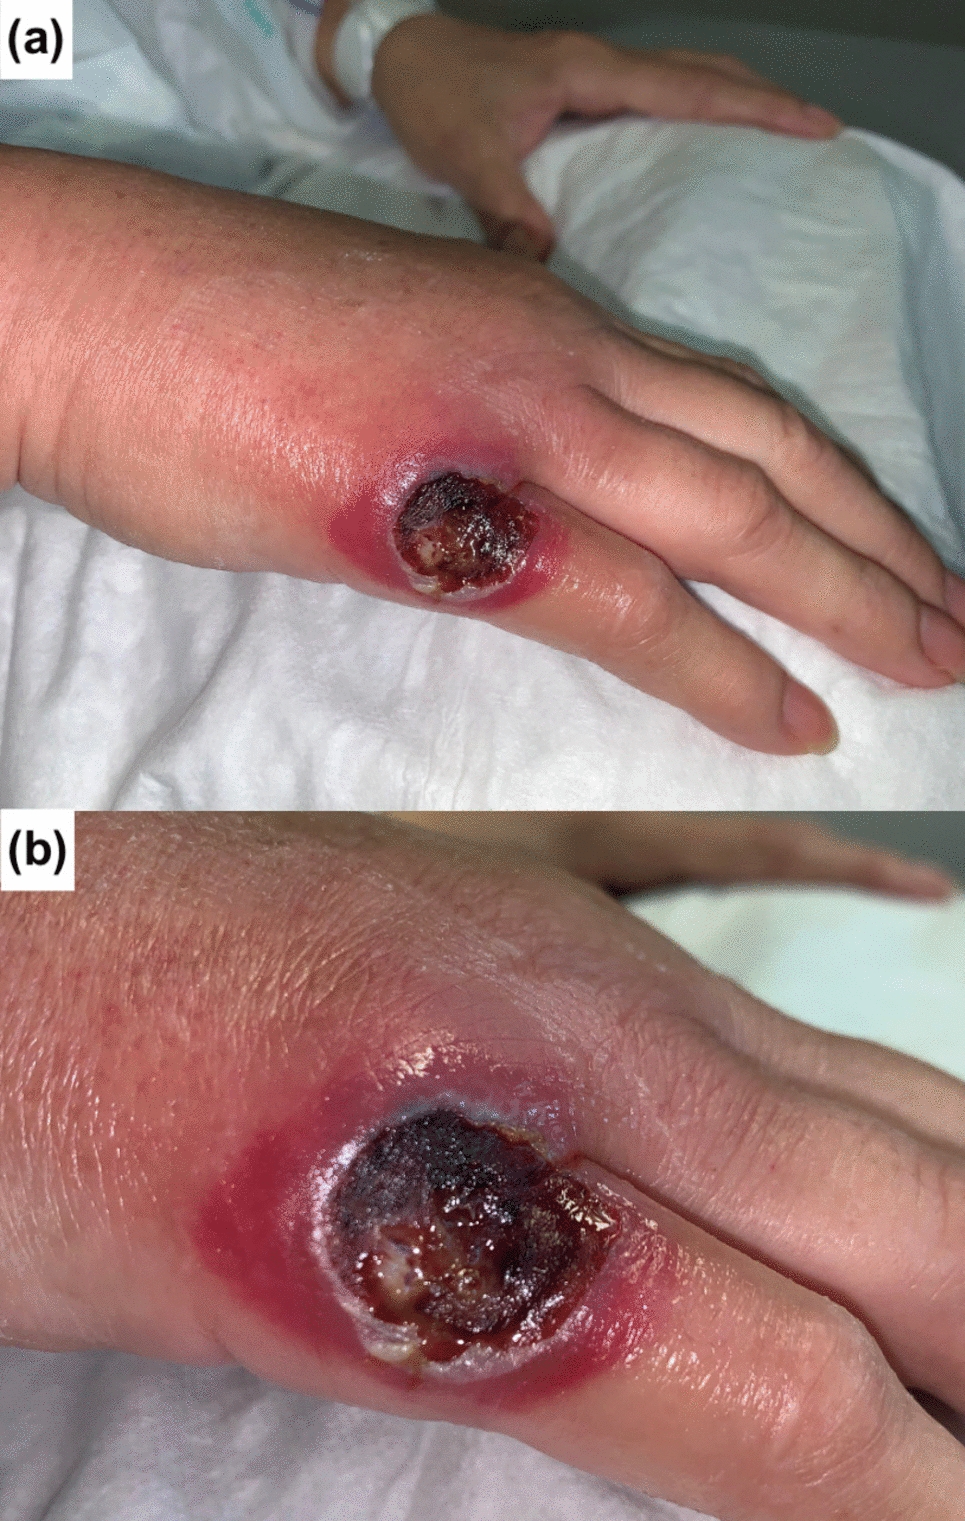 ‘Lesion on the back of the hand in a hematopoietic stem cell transplant recipient’